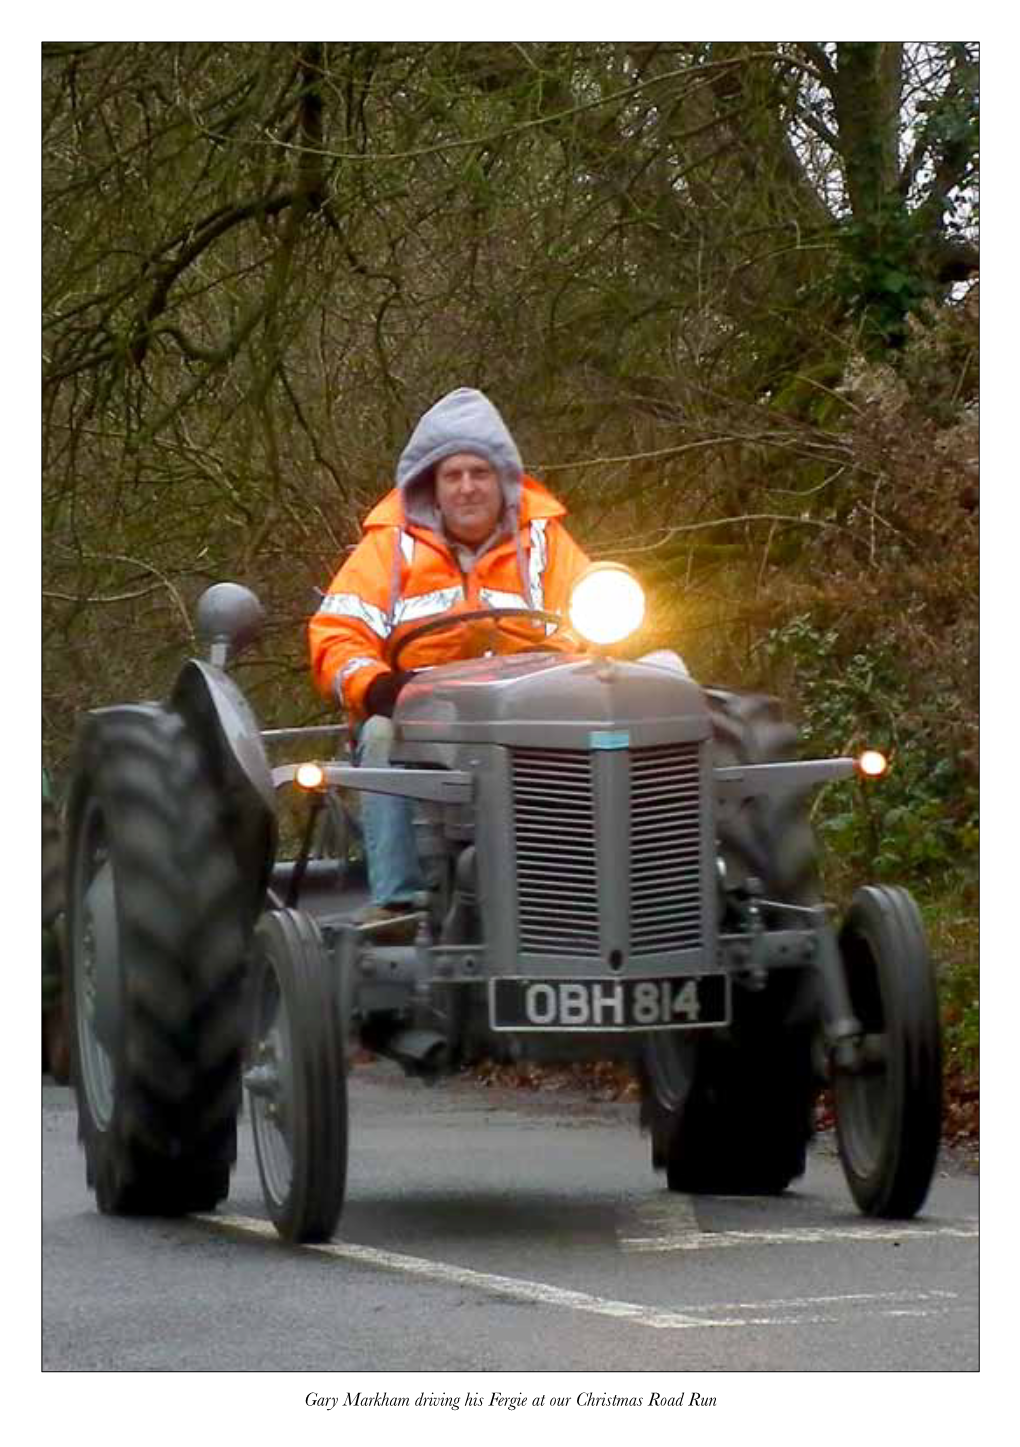 Gary Markham Driving His Fergie at Our Christmas Road